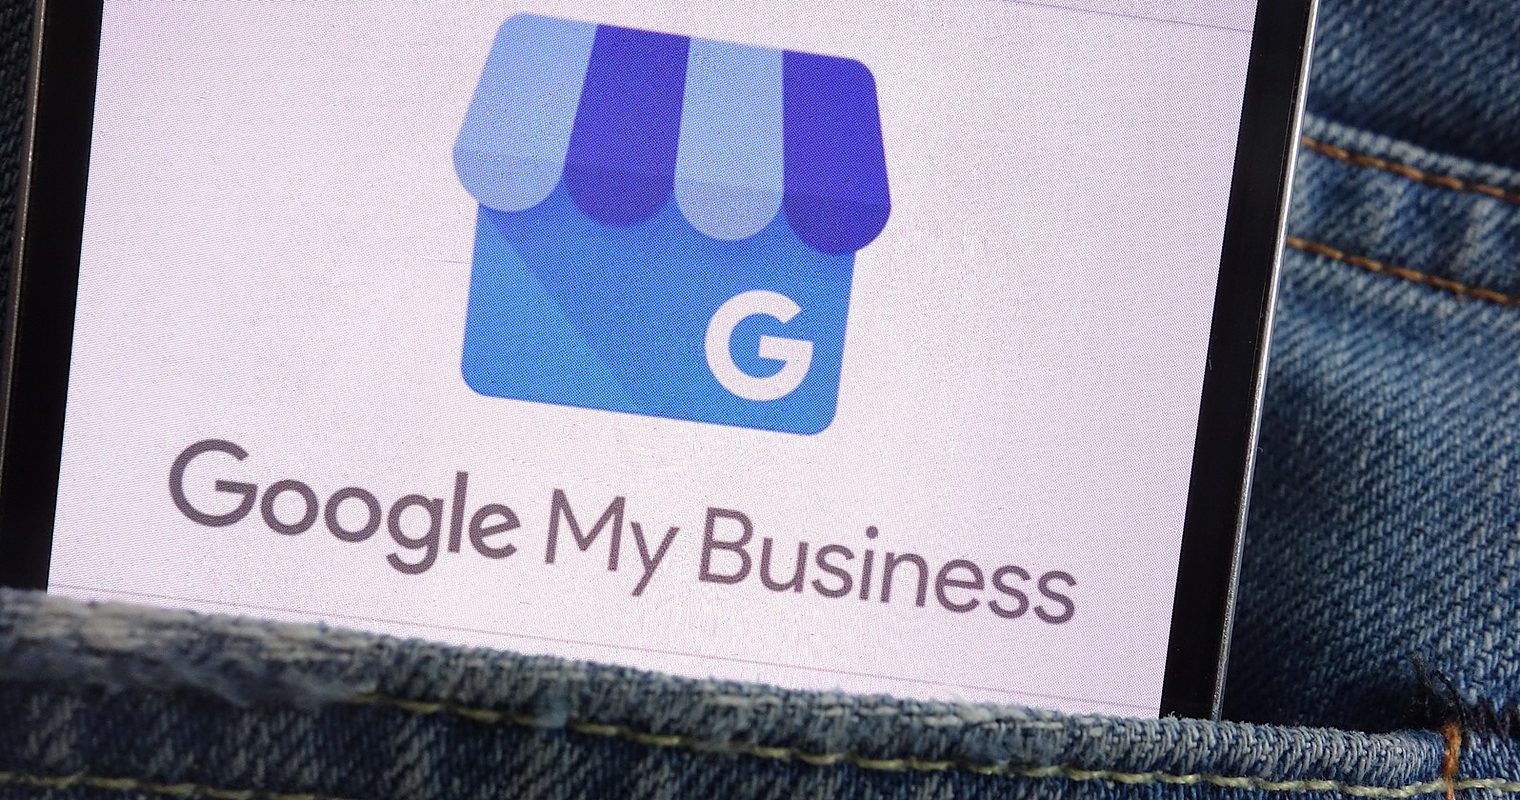 Google Shows Which Search Queries are Used to Find a Google My Business Listing